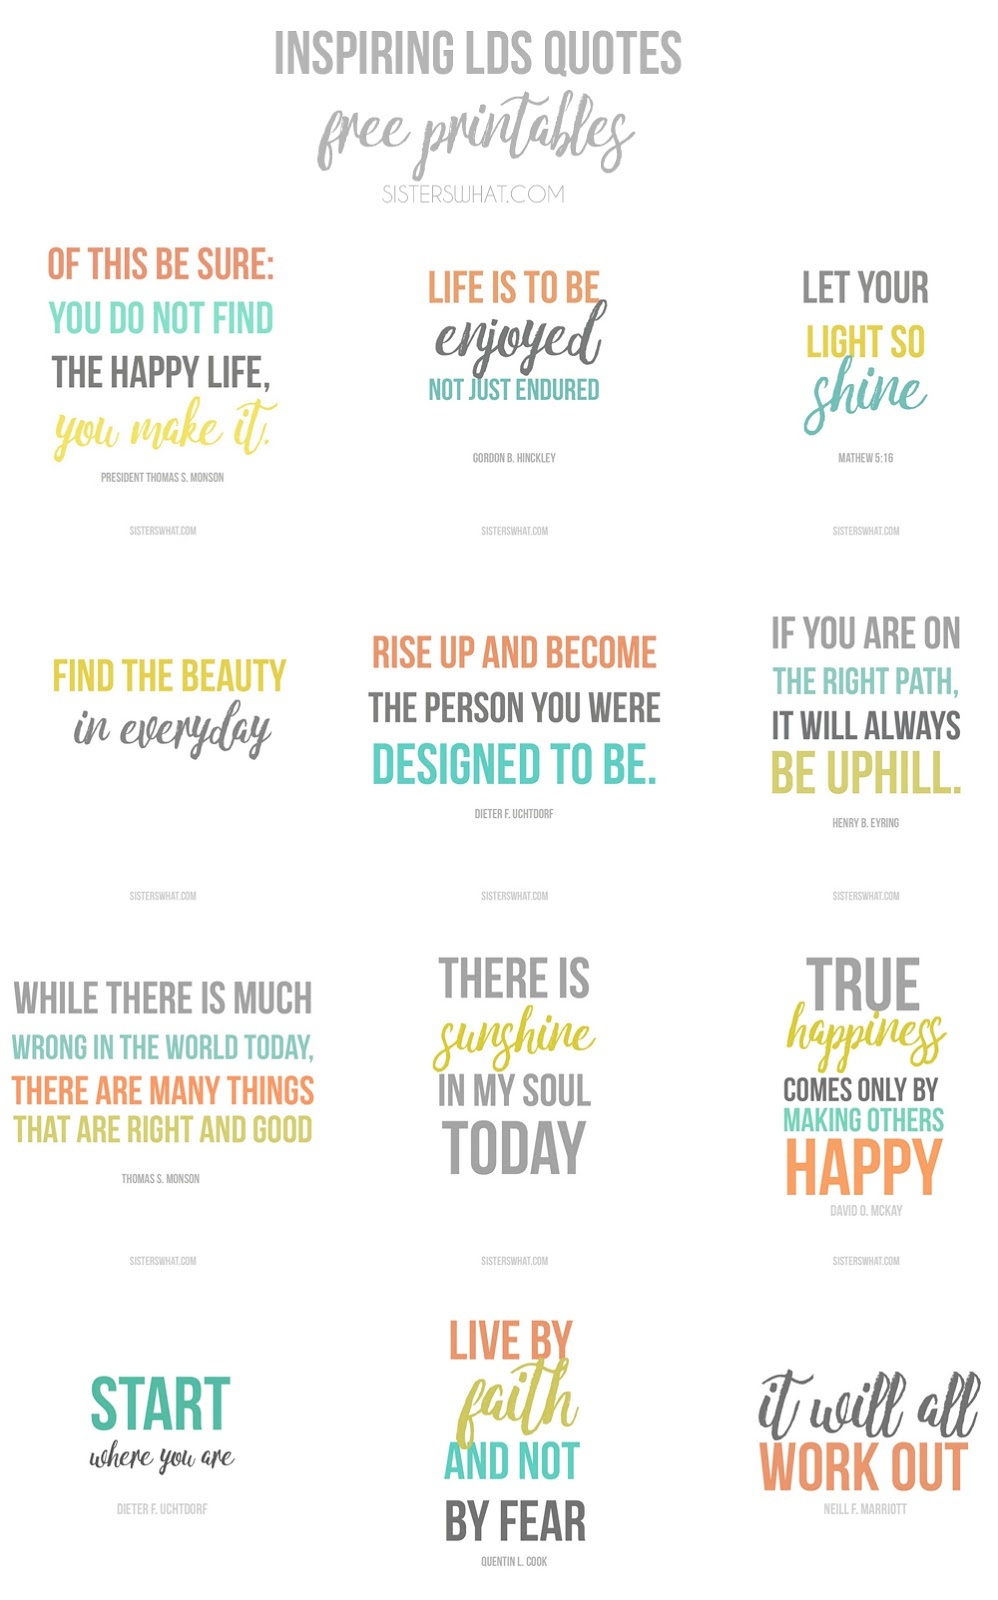 Inspirational Quotes Free Printables - Sisters, What! - Free Printable Inspirational Quotes